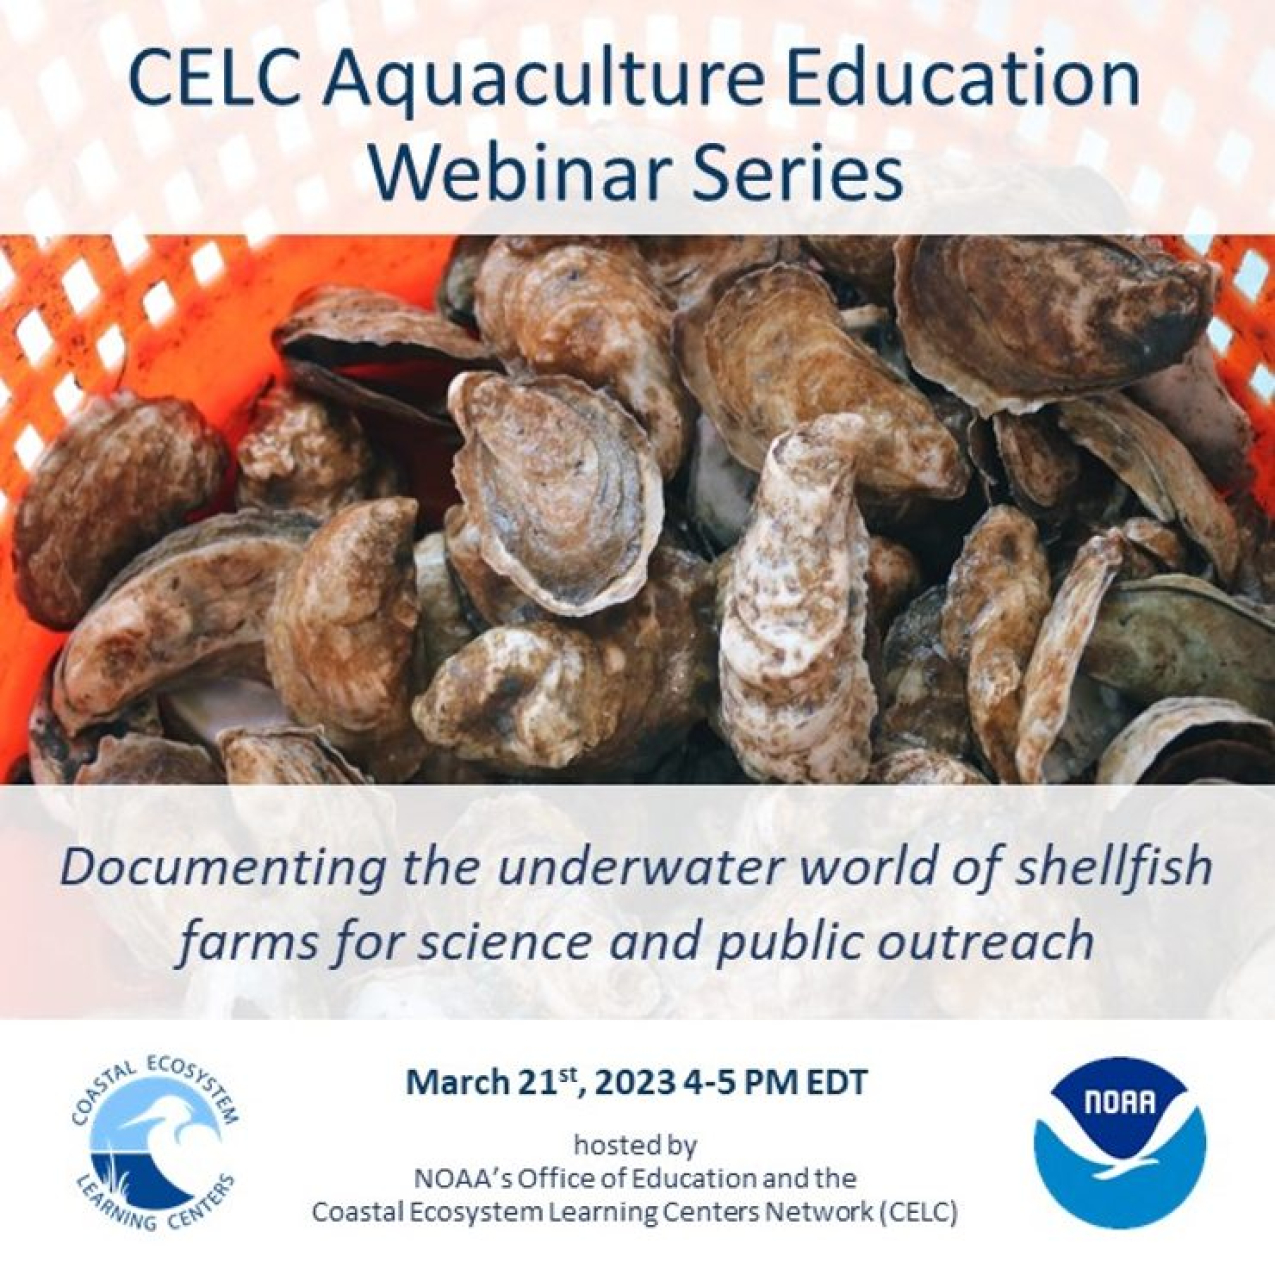 A flyer displaying information for the next CELC Aquaculture Education webinar: "documenting the underwater world of shellfish farms for science and public outreach" on March 21, 2023 from 4-5 PM. It notes that the webinar series is hosted by NOAA's Office of Education and the CELC network. The flyer also shows a bucket holding oysters, and the NOAA and CELC logos. 